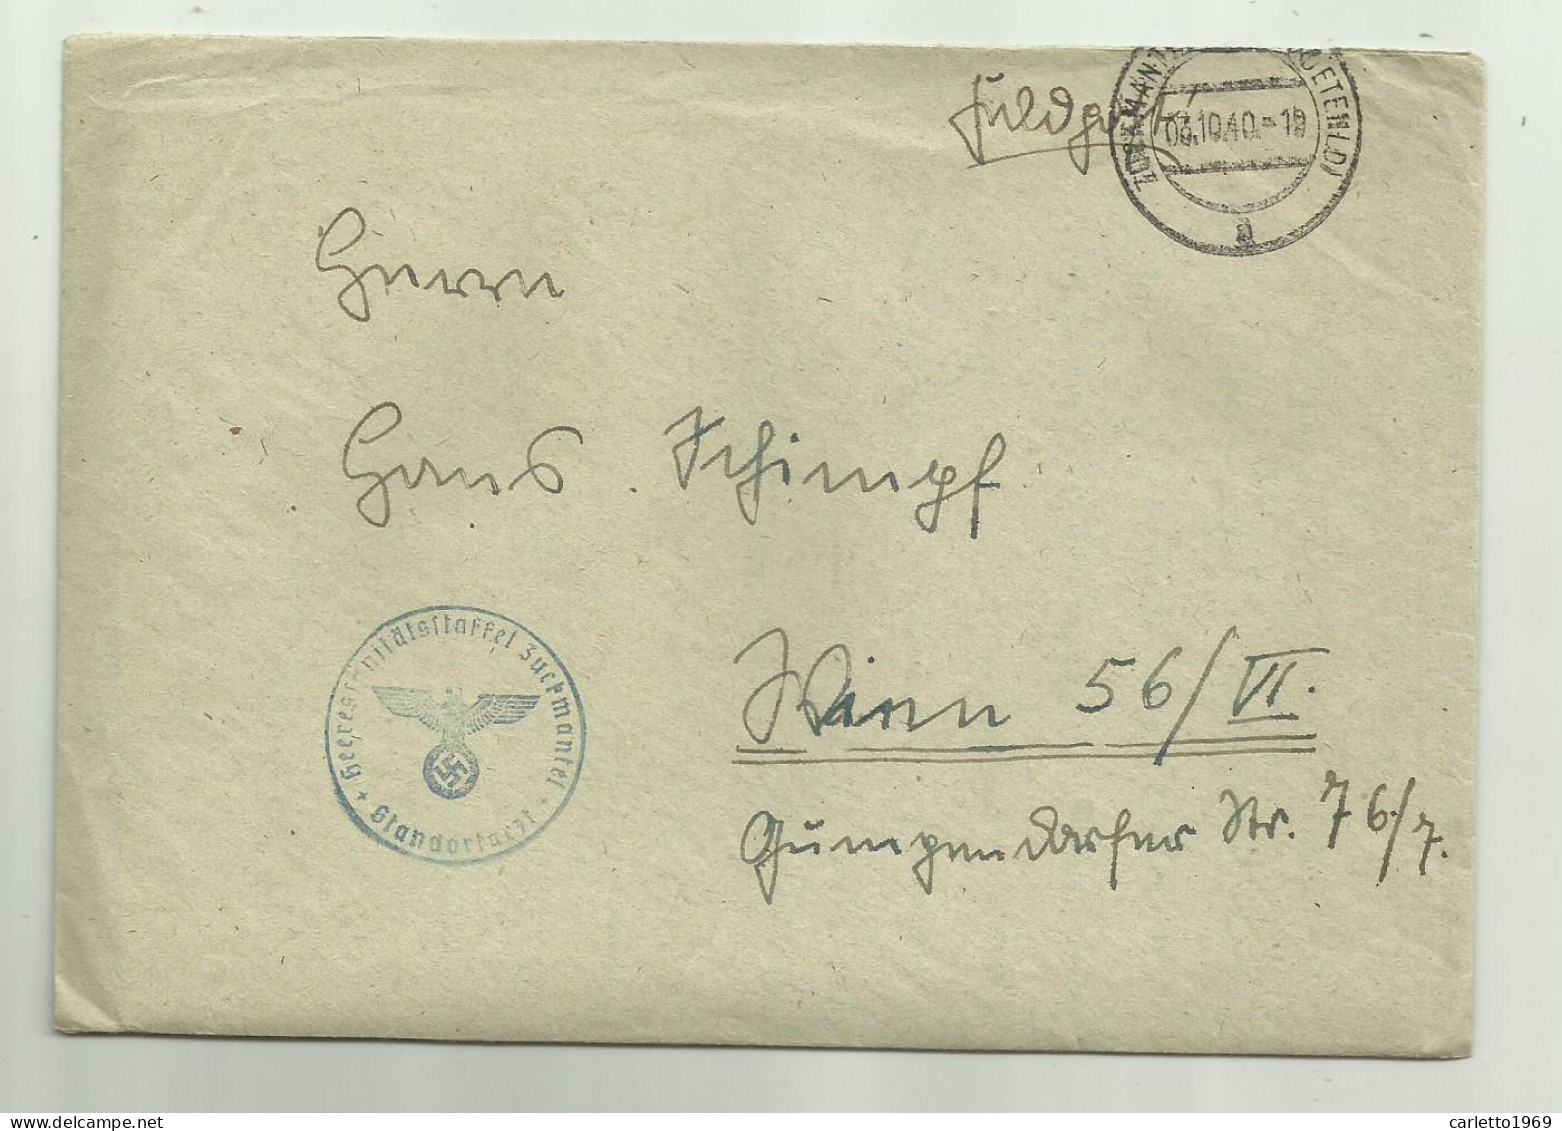  FELDPOST  1940   CON LETTERA  - Used Stamps